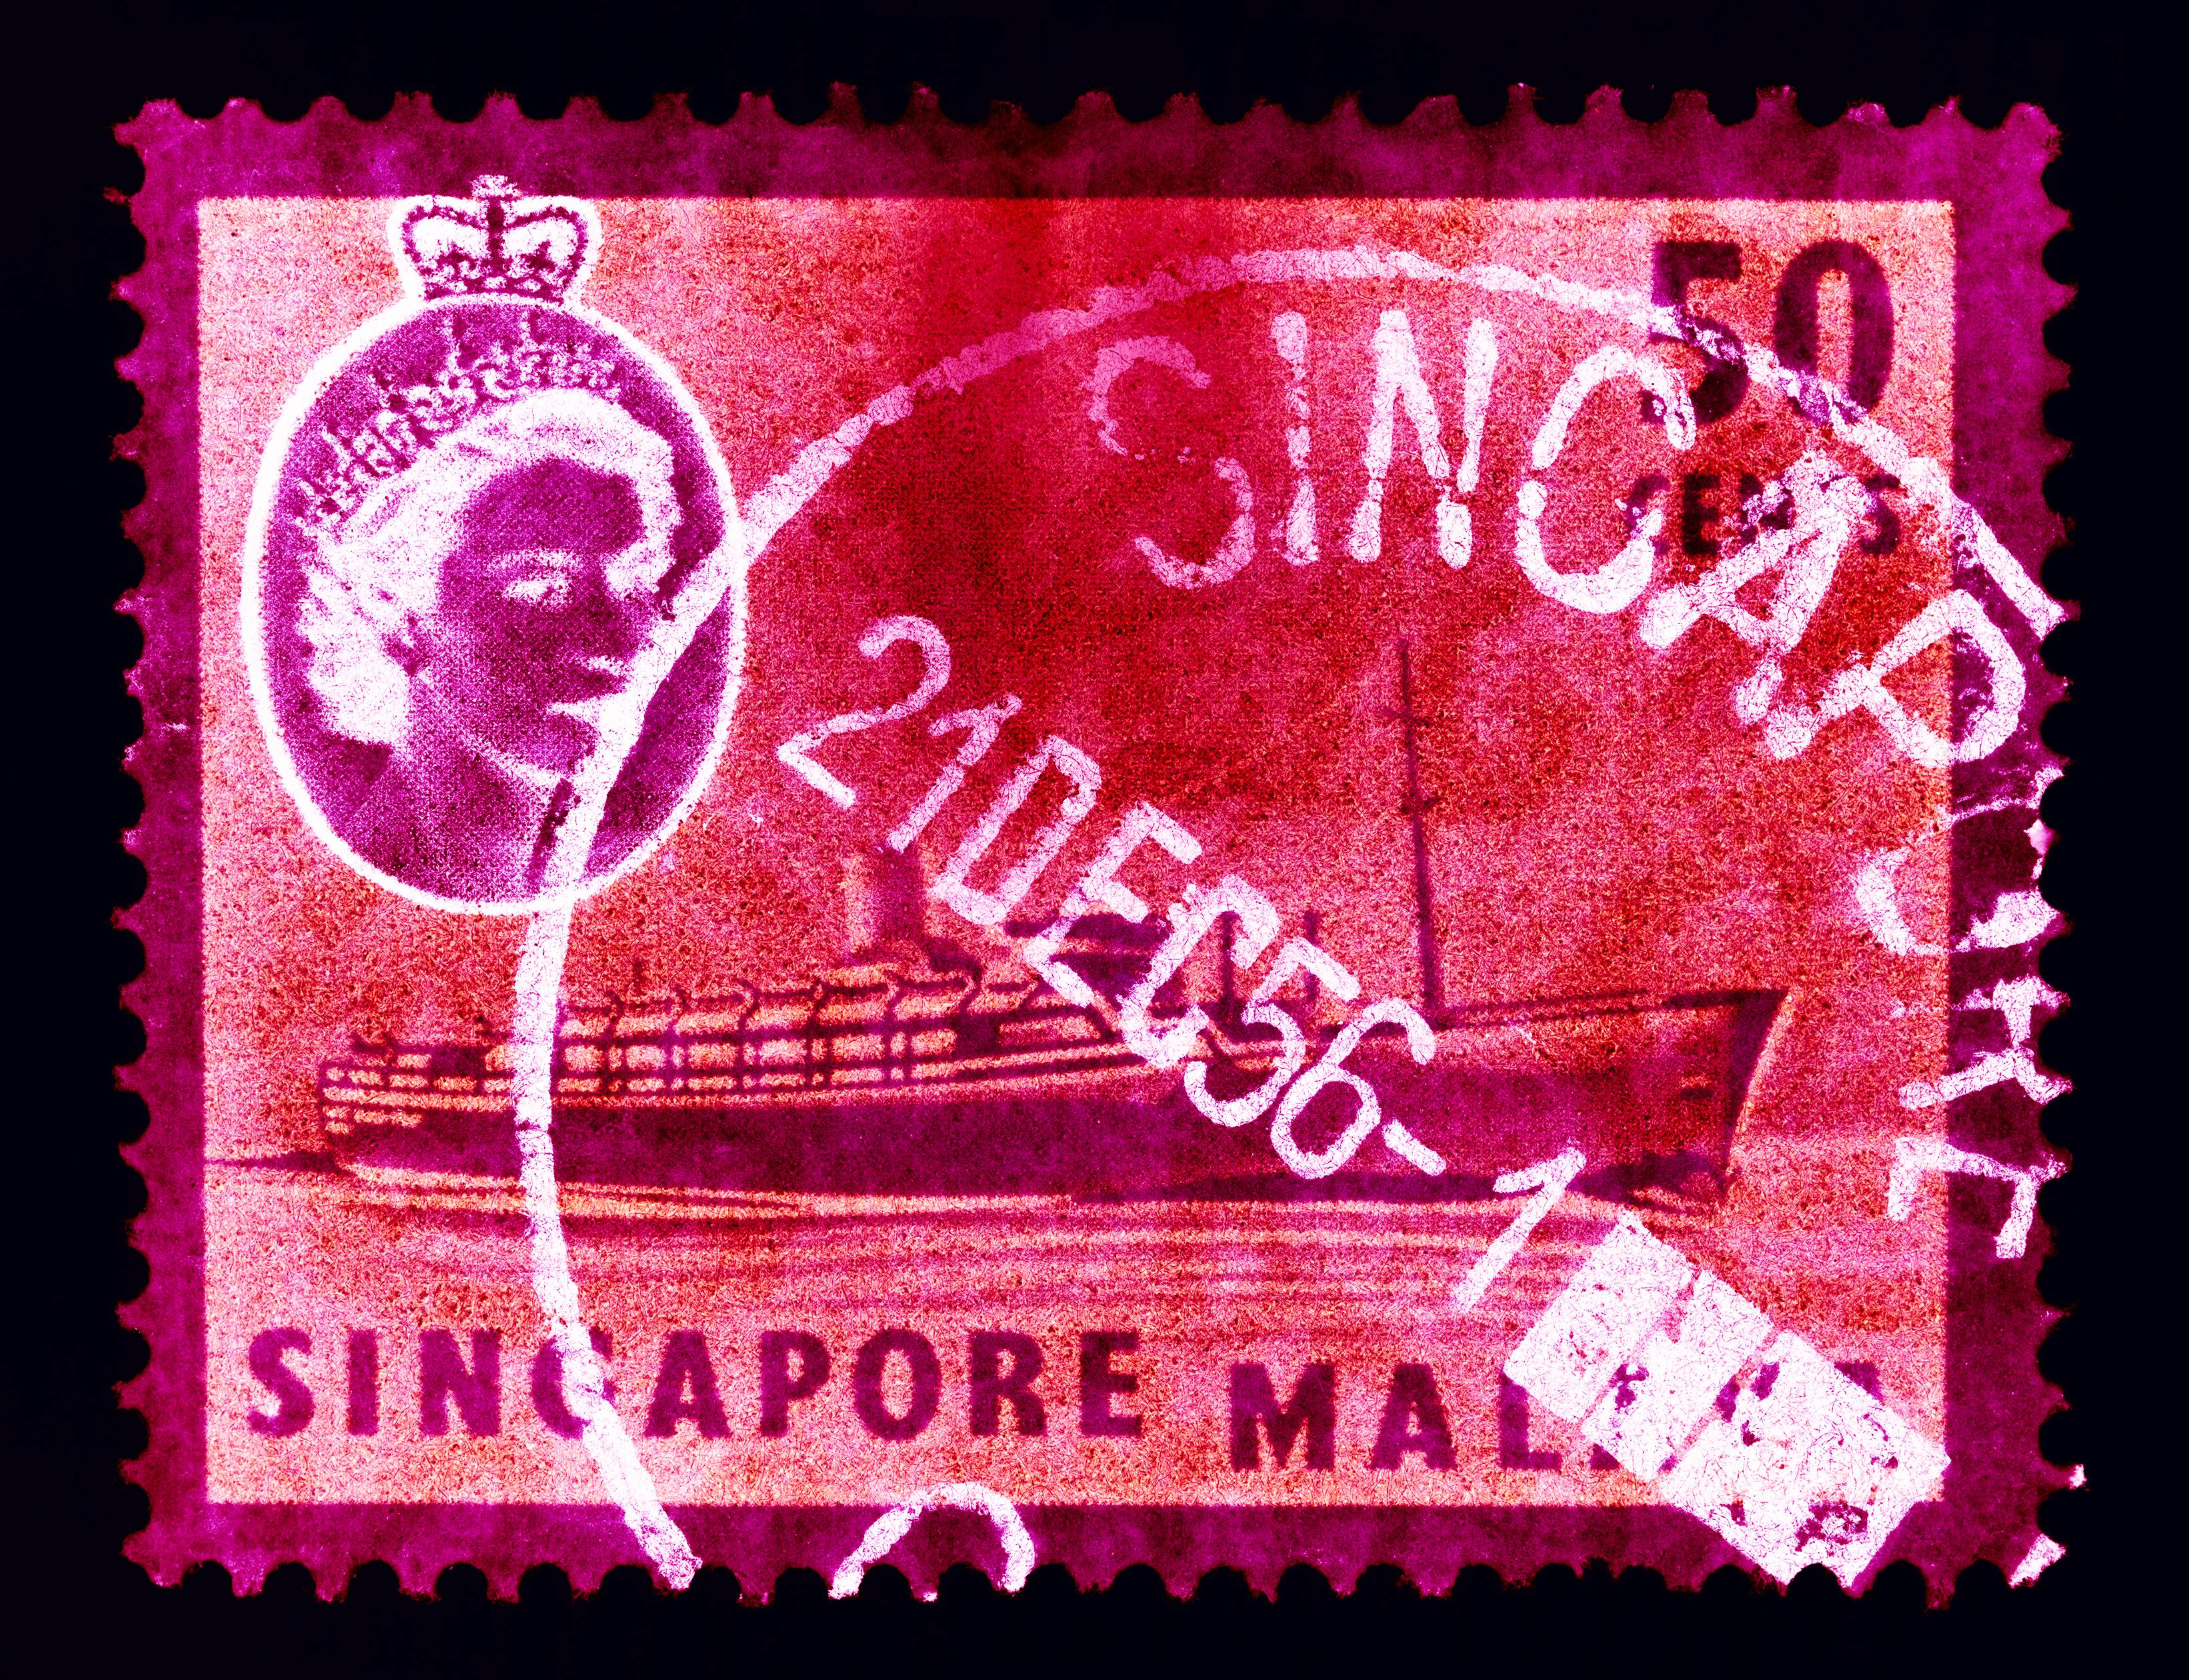 Heidler & Heeps Color Photograph - Singapore Stamp Collection, 50c QEII Steamer Ship Pink - Pop Art Color Photo